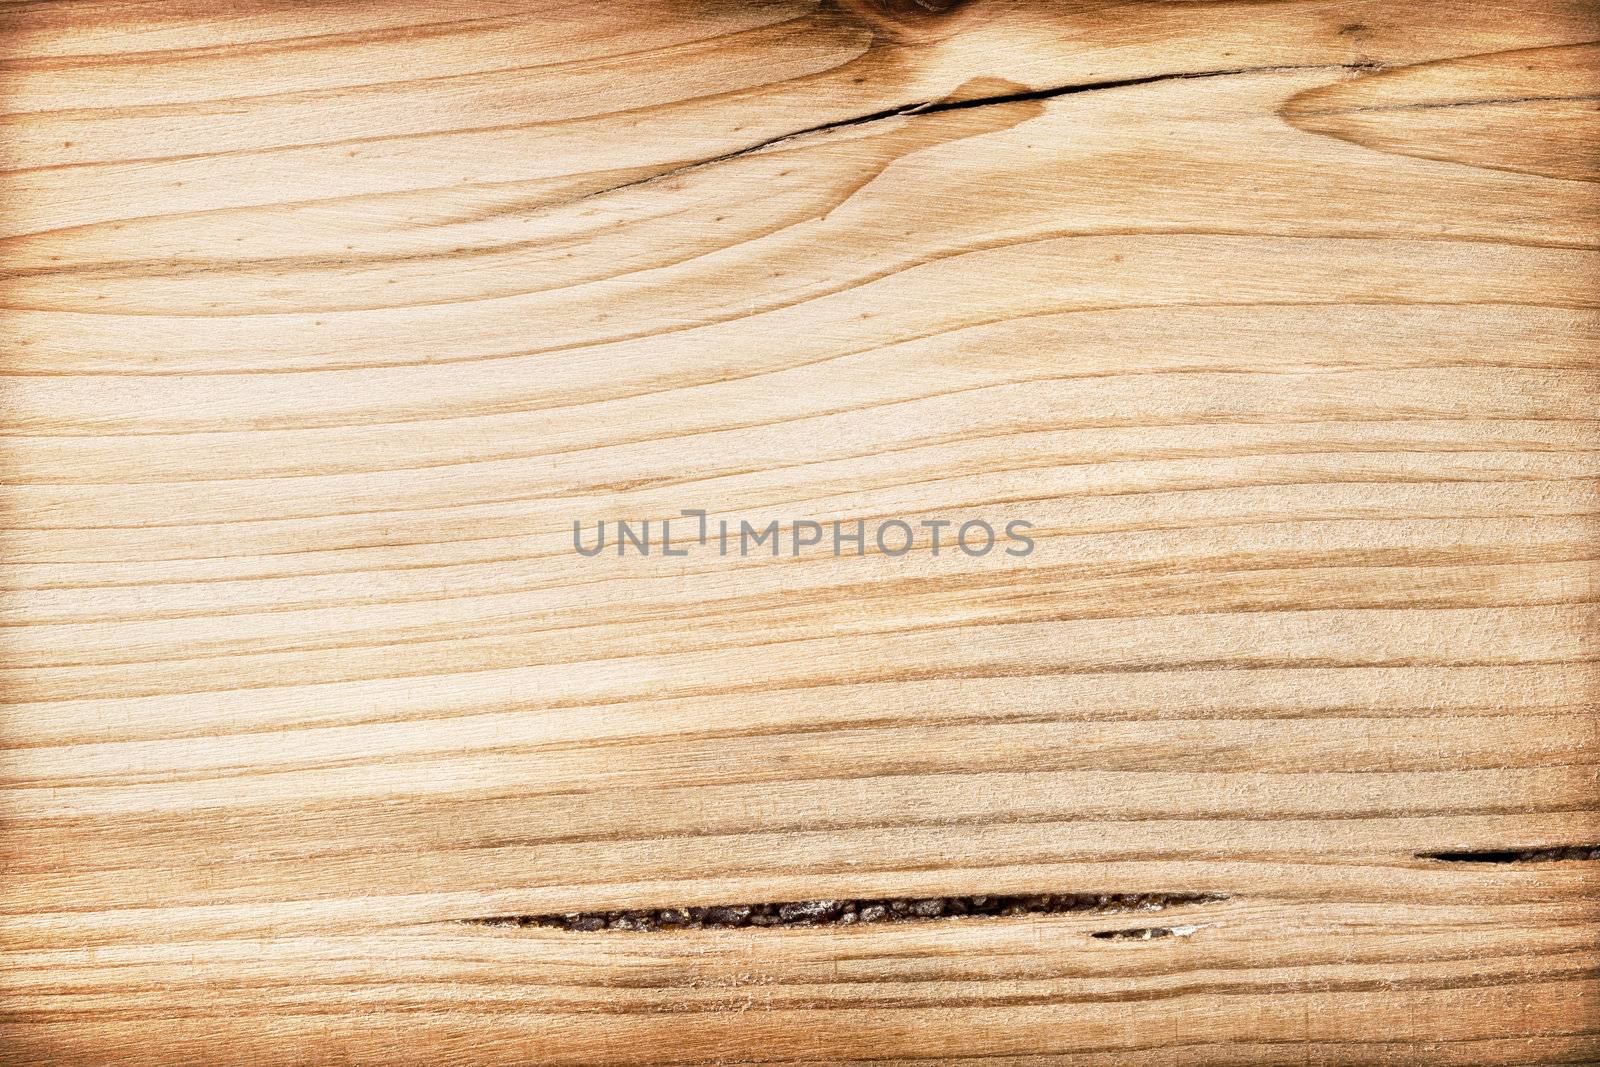 Wood texture for background, macro shot vintage style